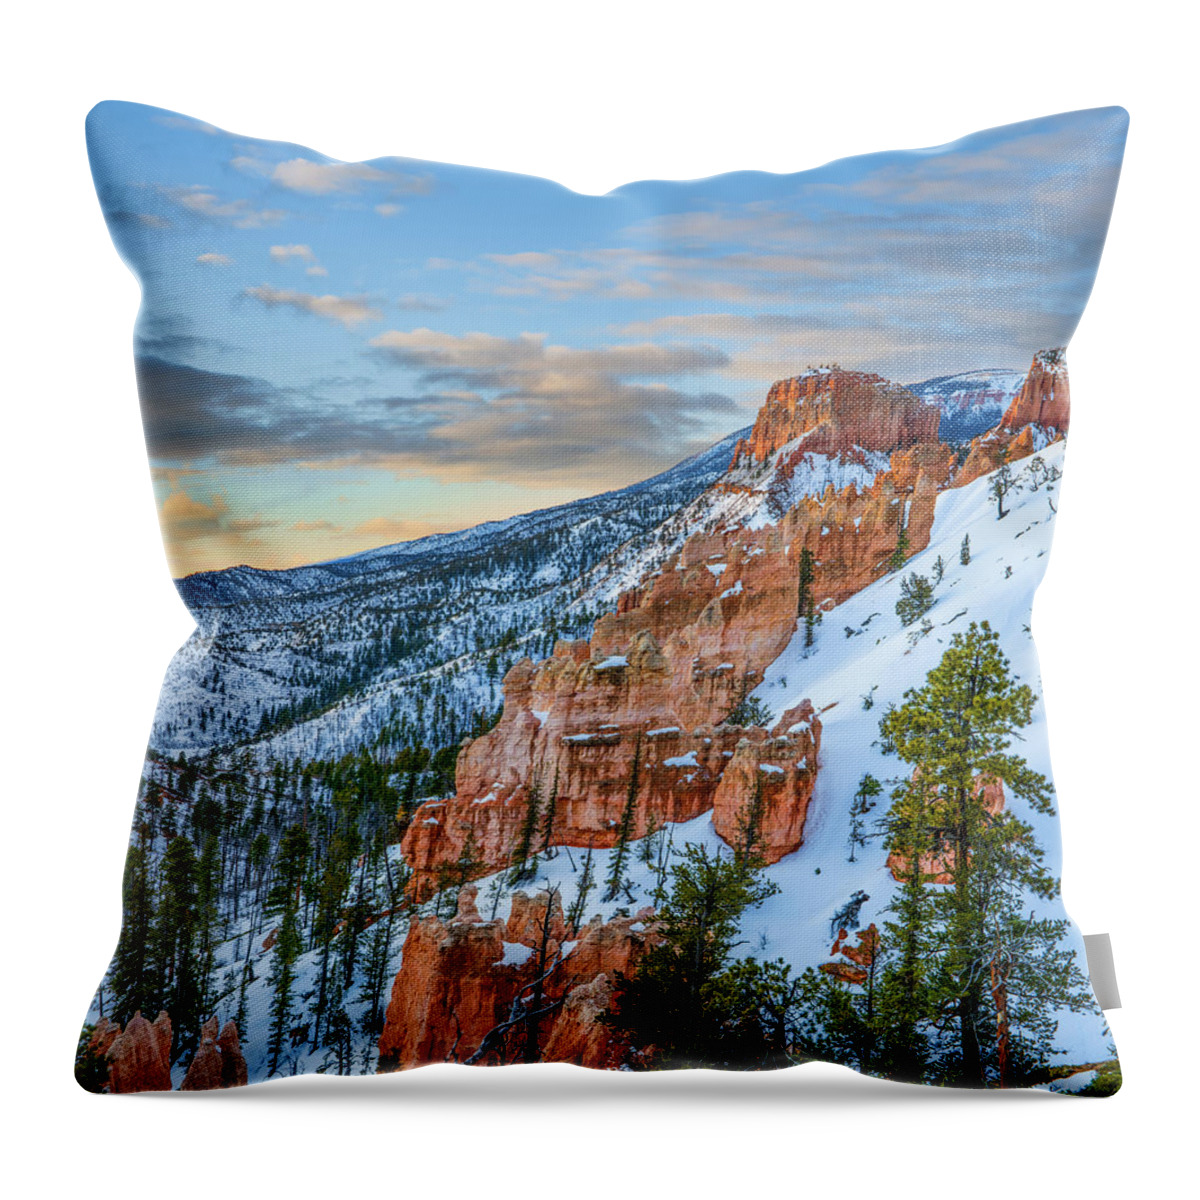 00567620 Throw Pillow featuring the photograph Hoodoos In Winter, Bryce Canyon National Park, Utah by Tim Fitzharris